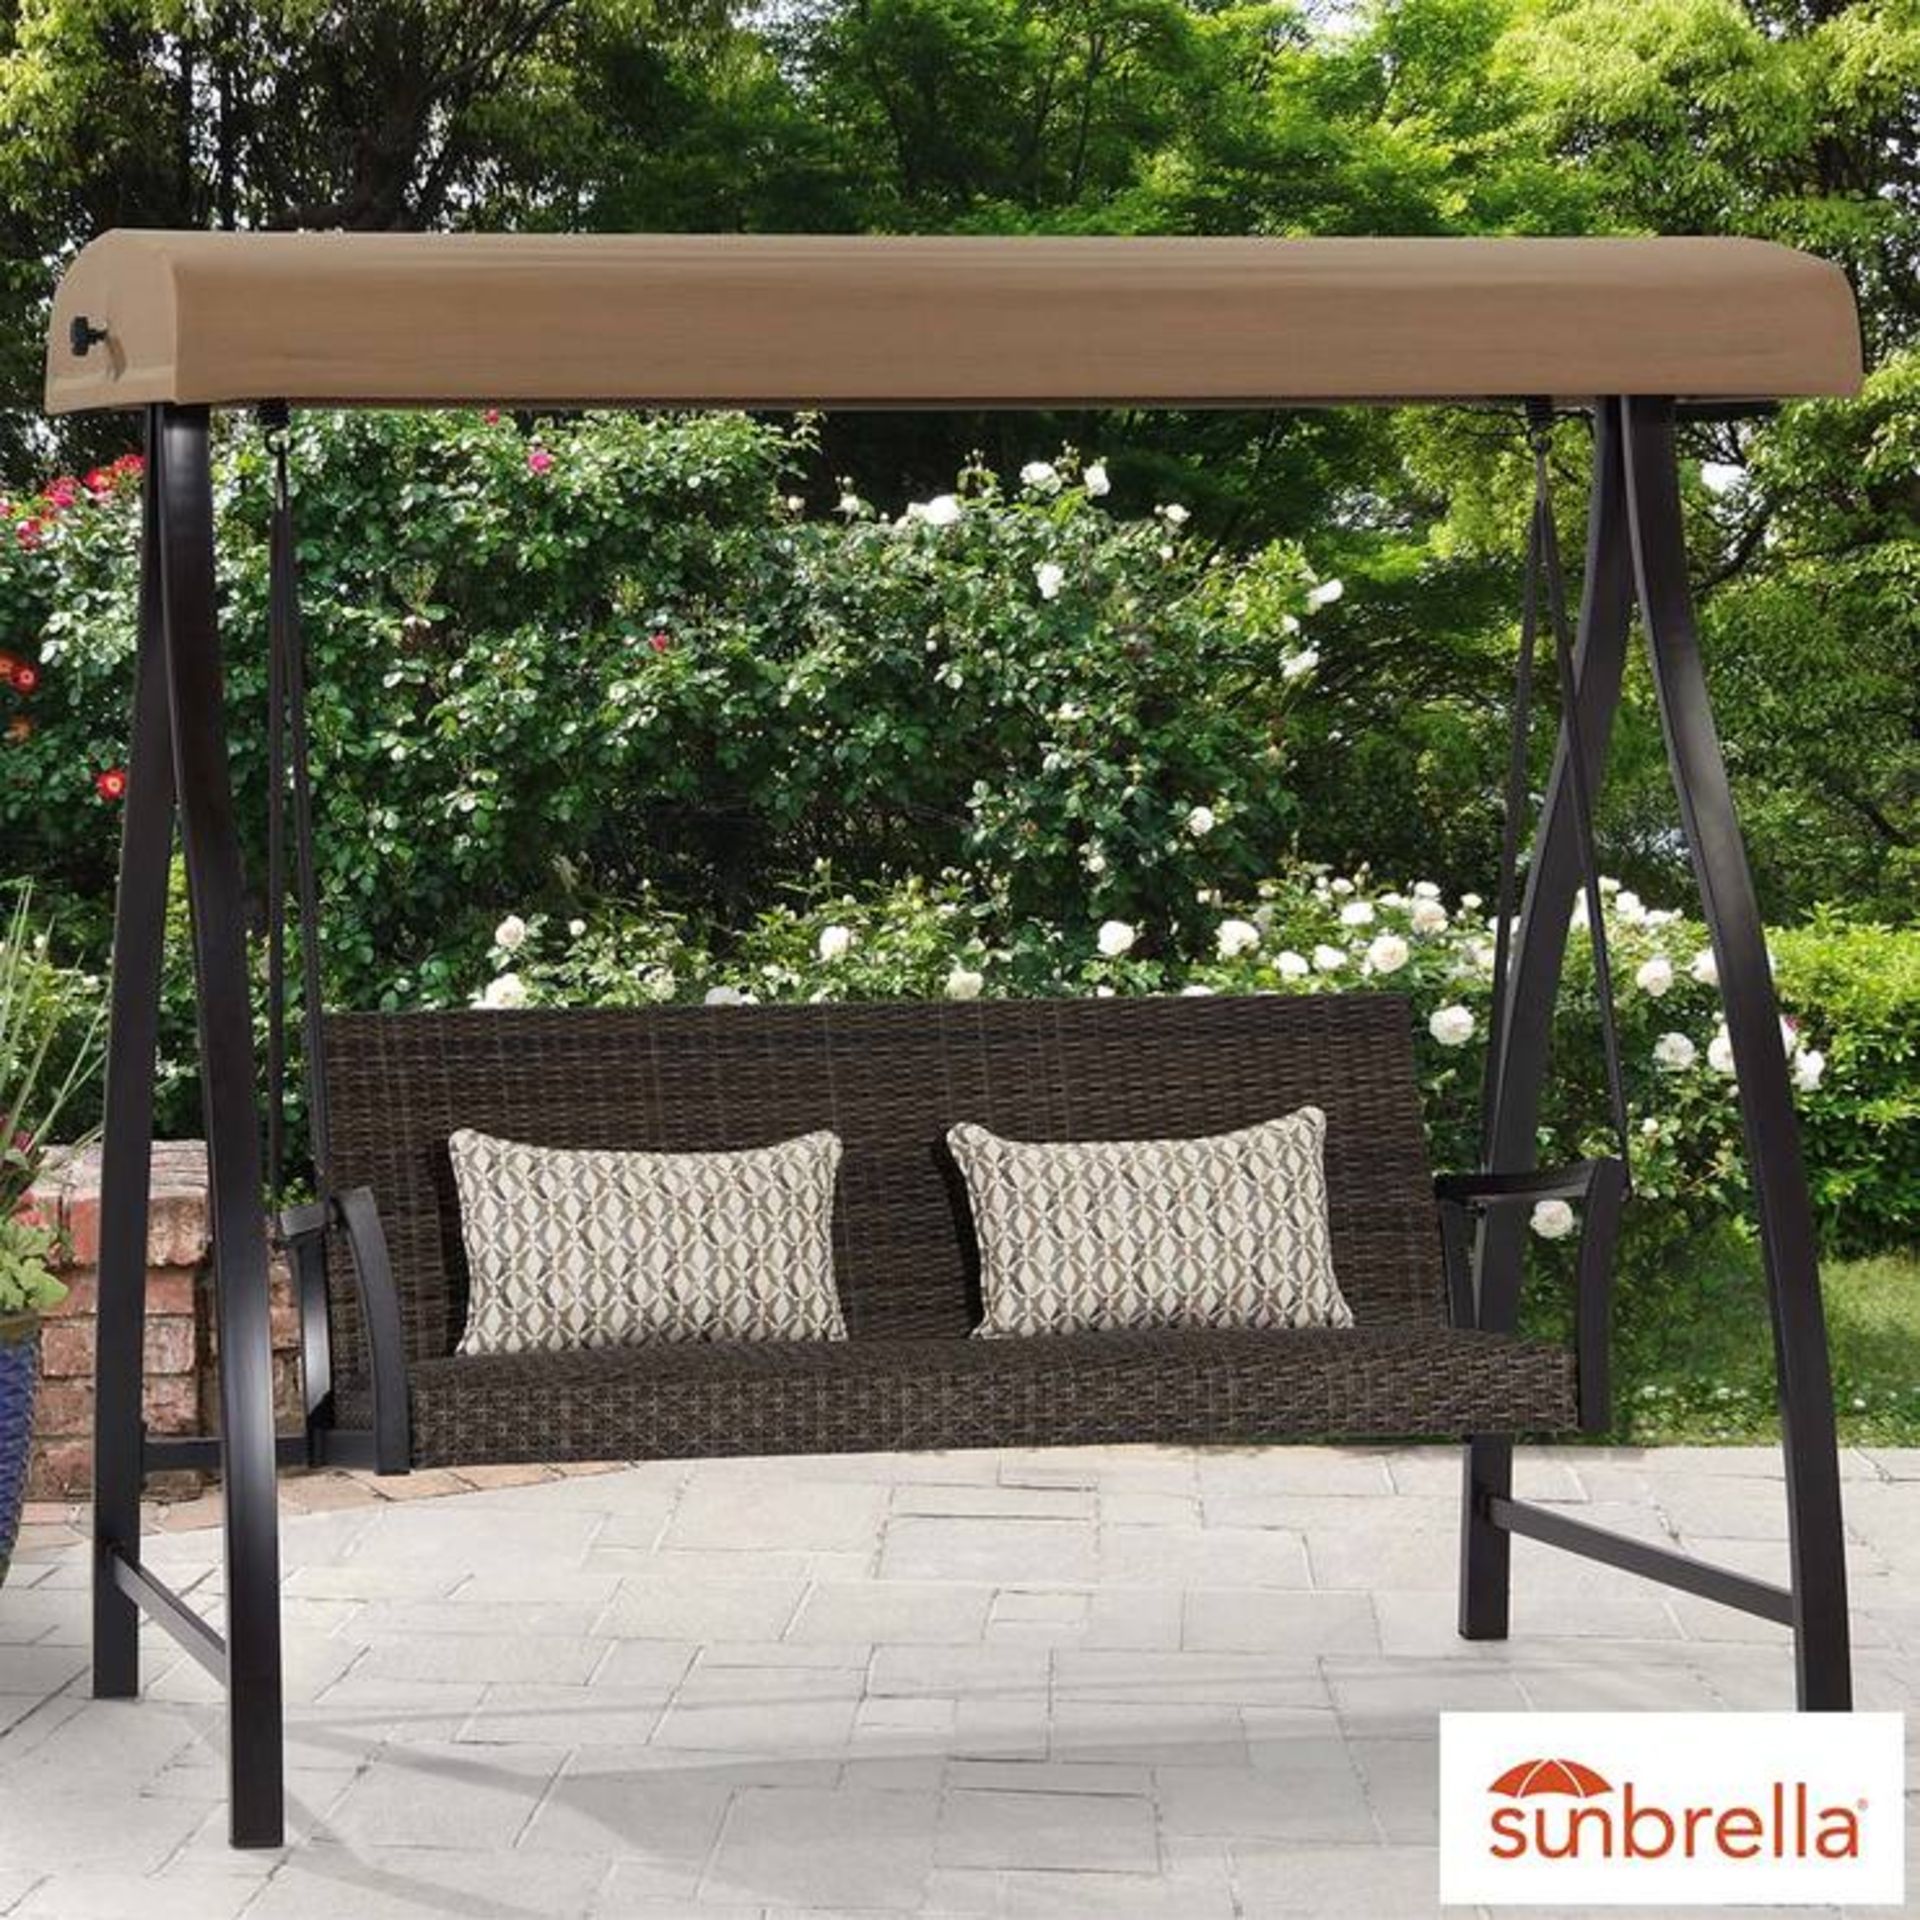 1 AGIO SPRINGDALE PATIO WOVEN SWING WITH ACCENT PILLOWS H 190 X W 124 X D 206 CM RRP Â£599 (